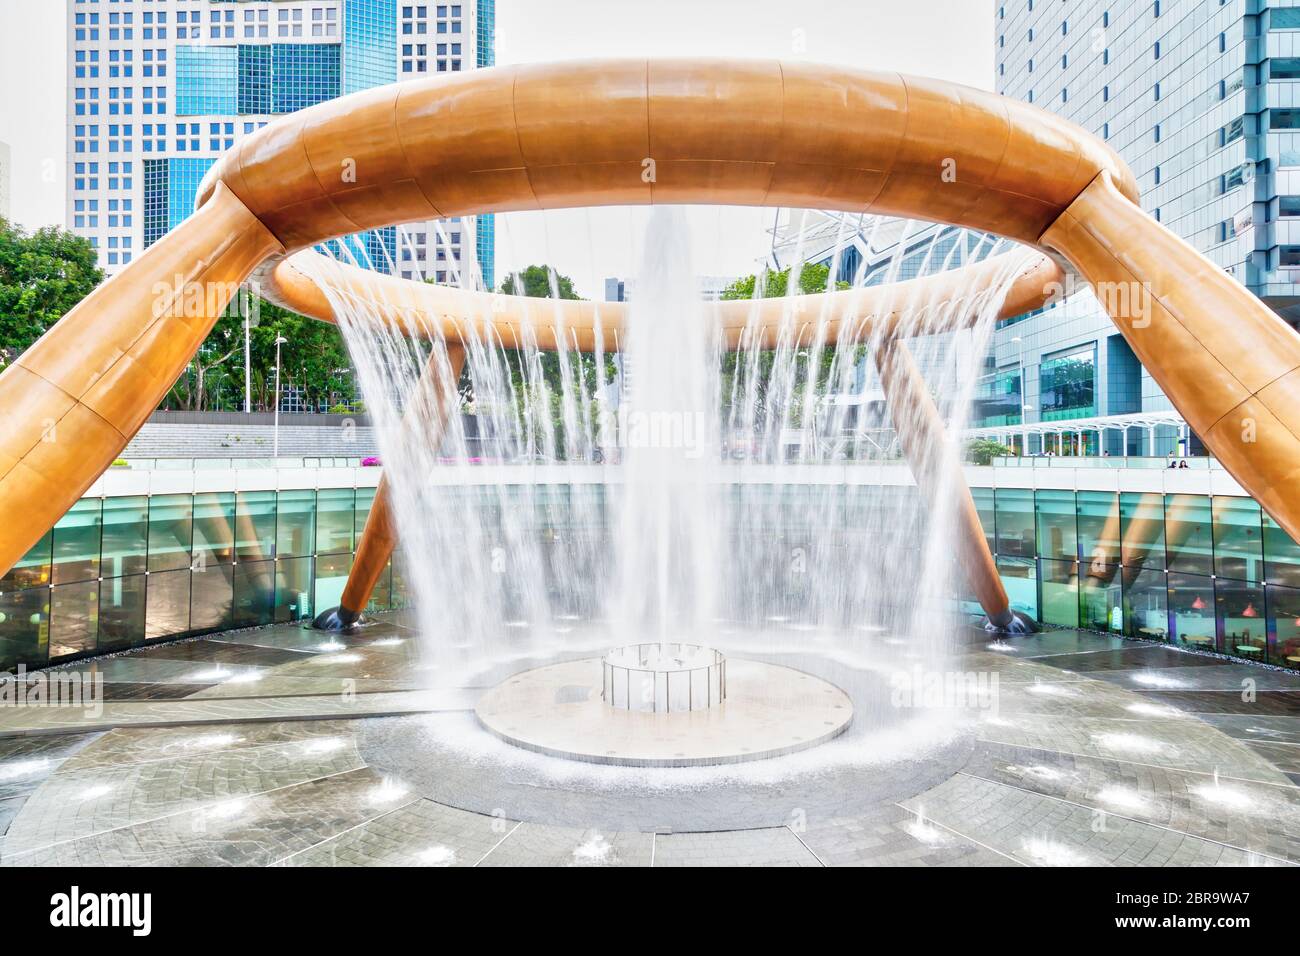 SINGAPORE - MARCH 26, 2015 : The Fountain of Wealth is the largest fountain in the world. It is located in the commercial complex of Suntec City, Sing Stock Photo